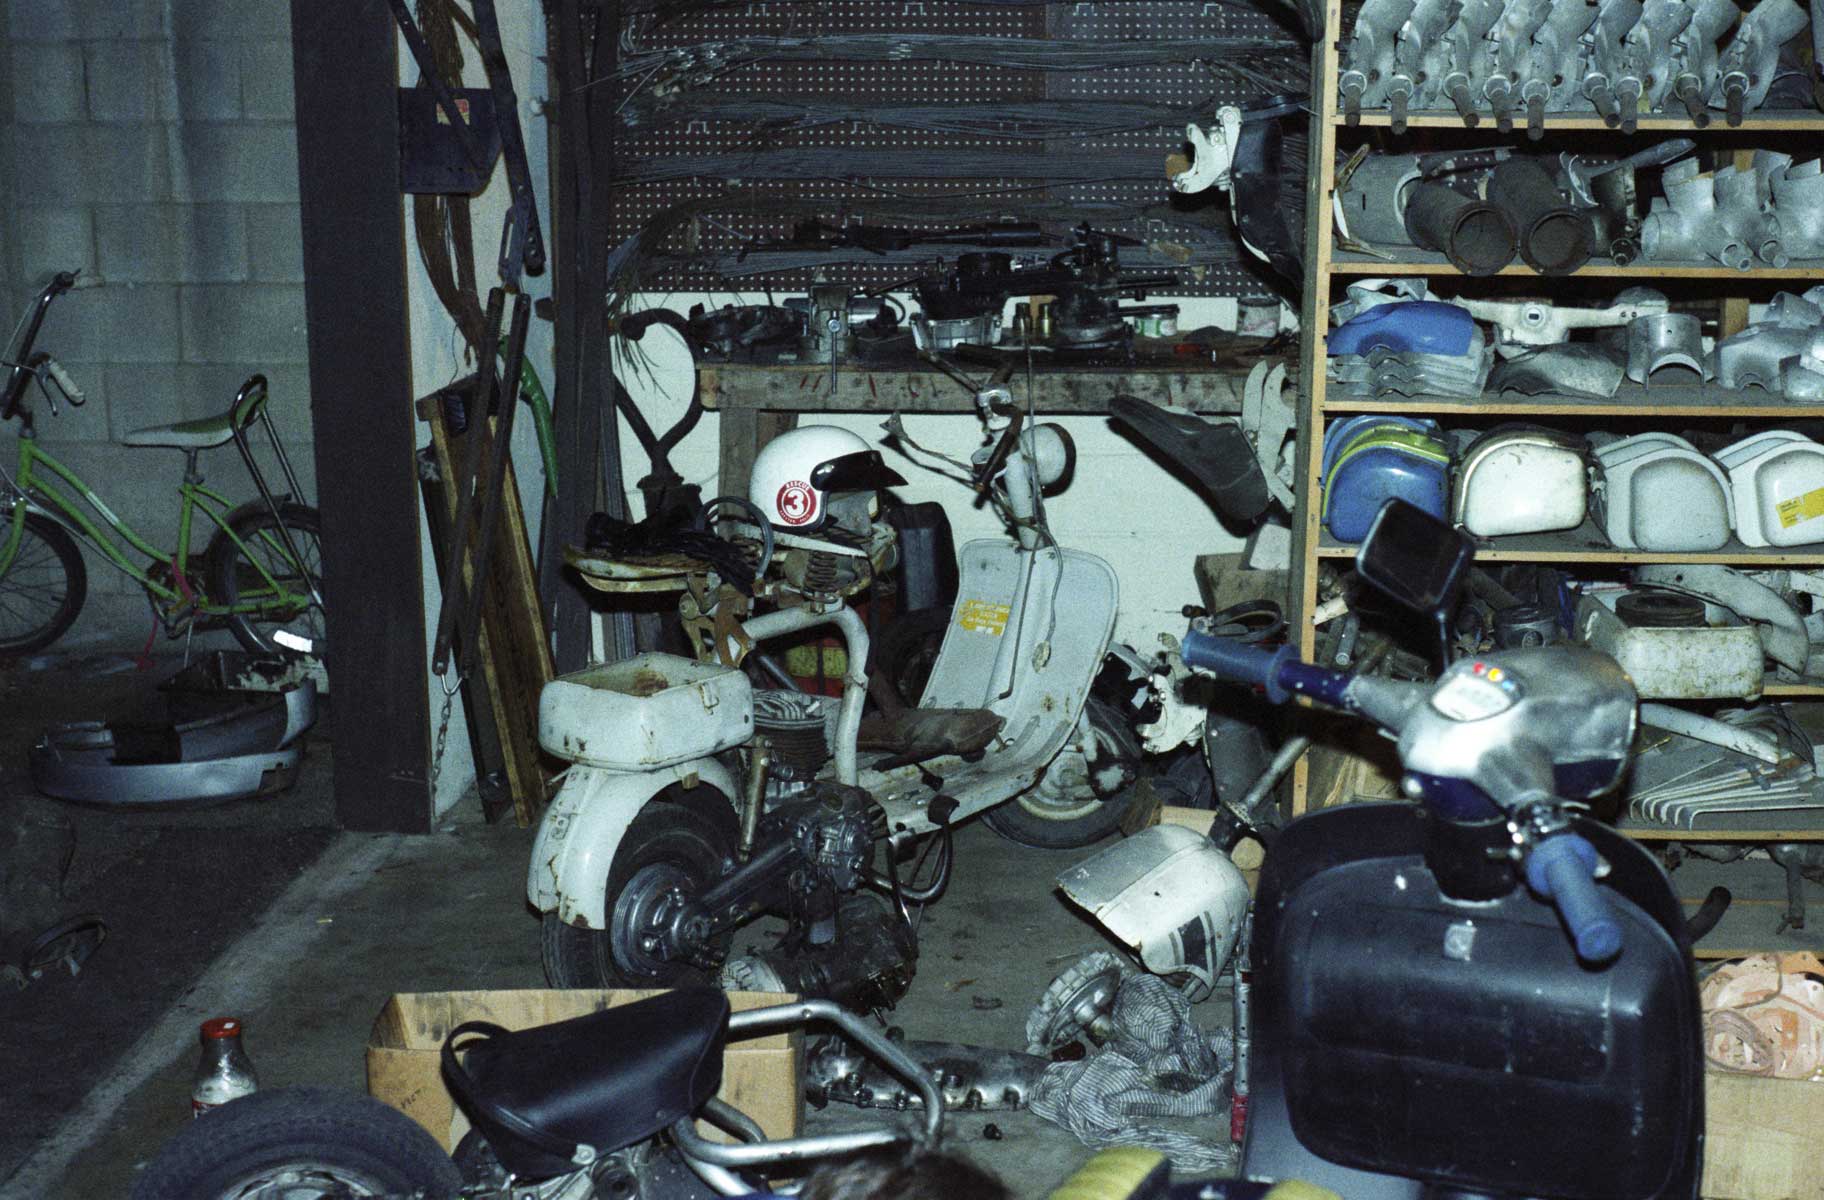 Check out those original Innocenti tool boxes, engine cases, and gray cables with inline oilers!